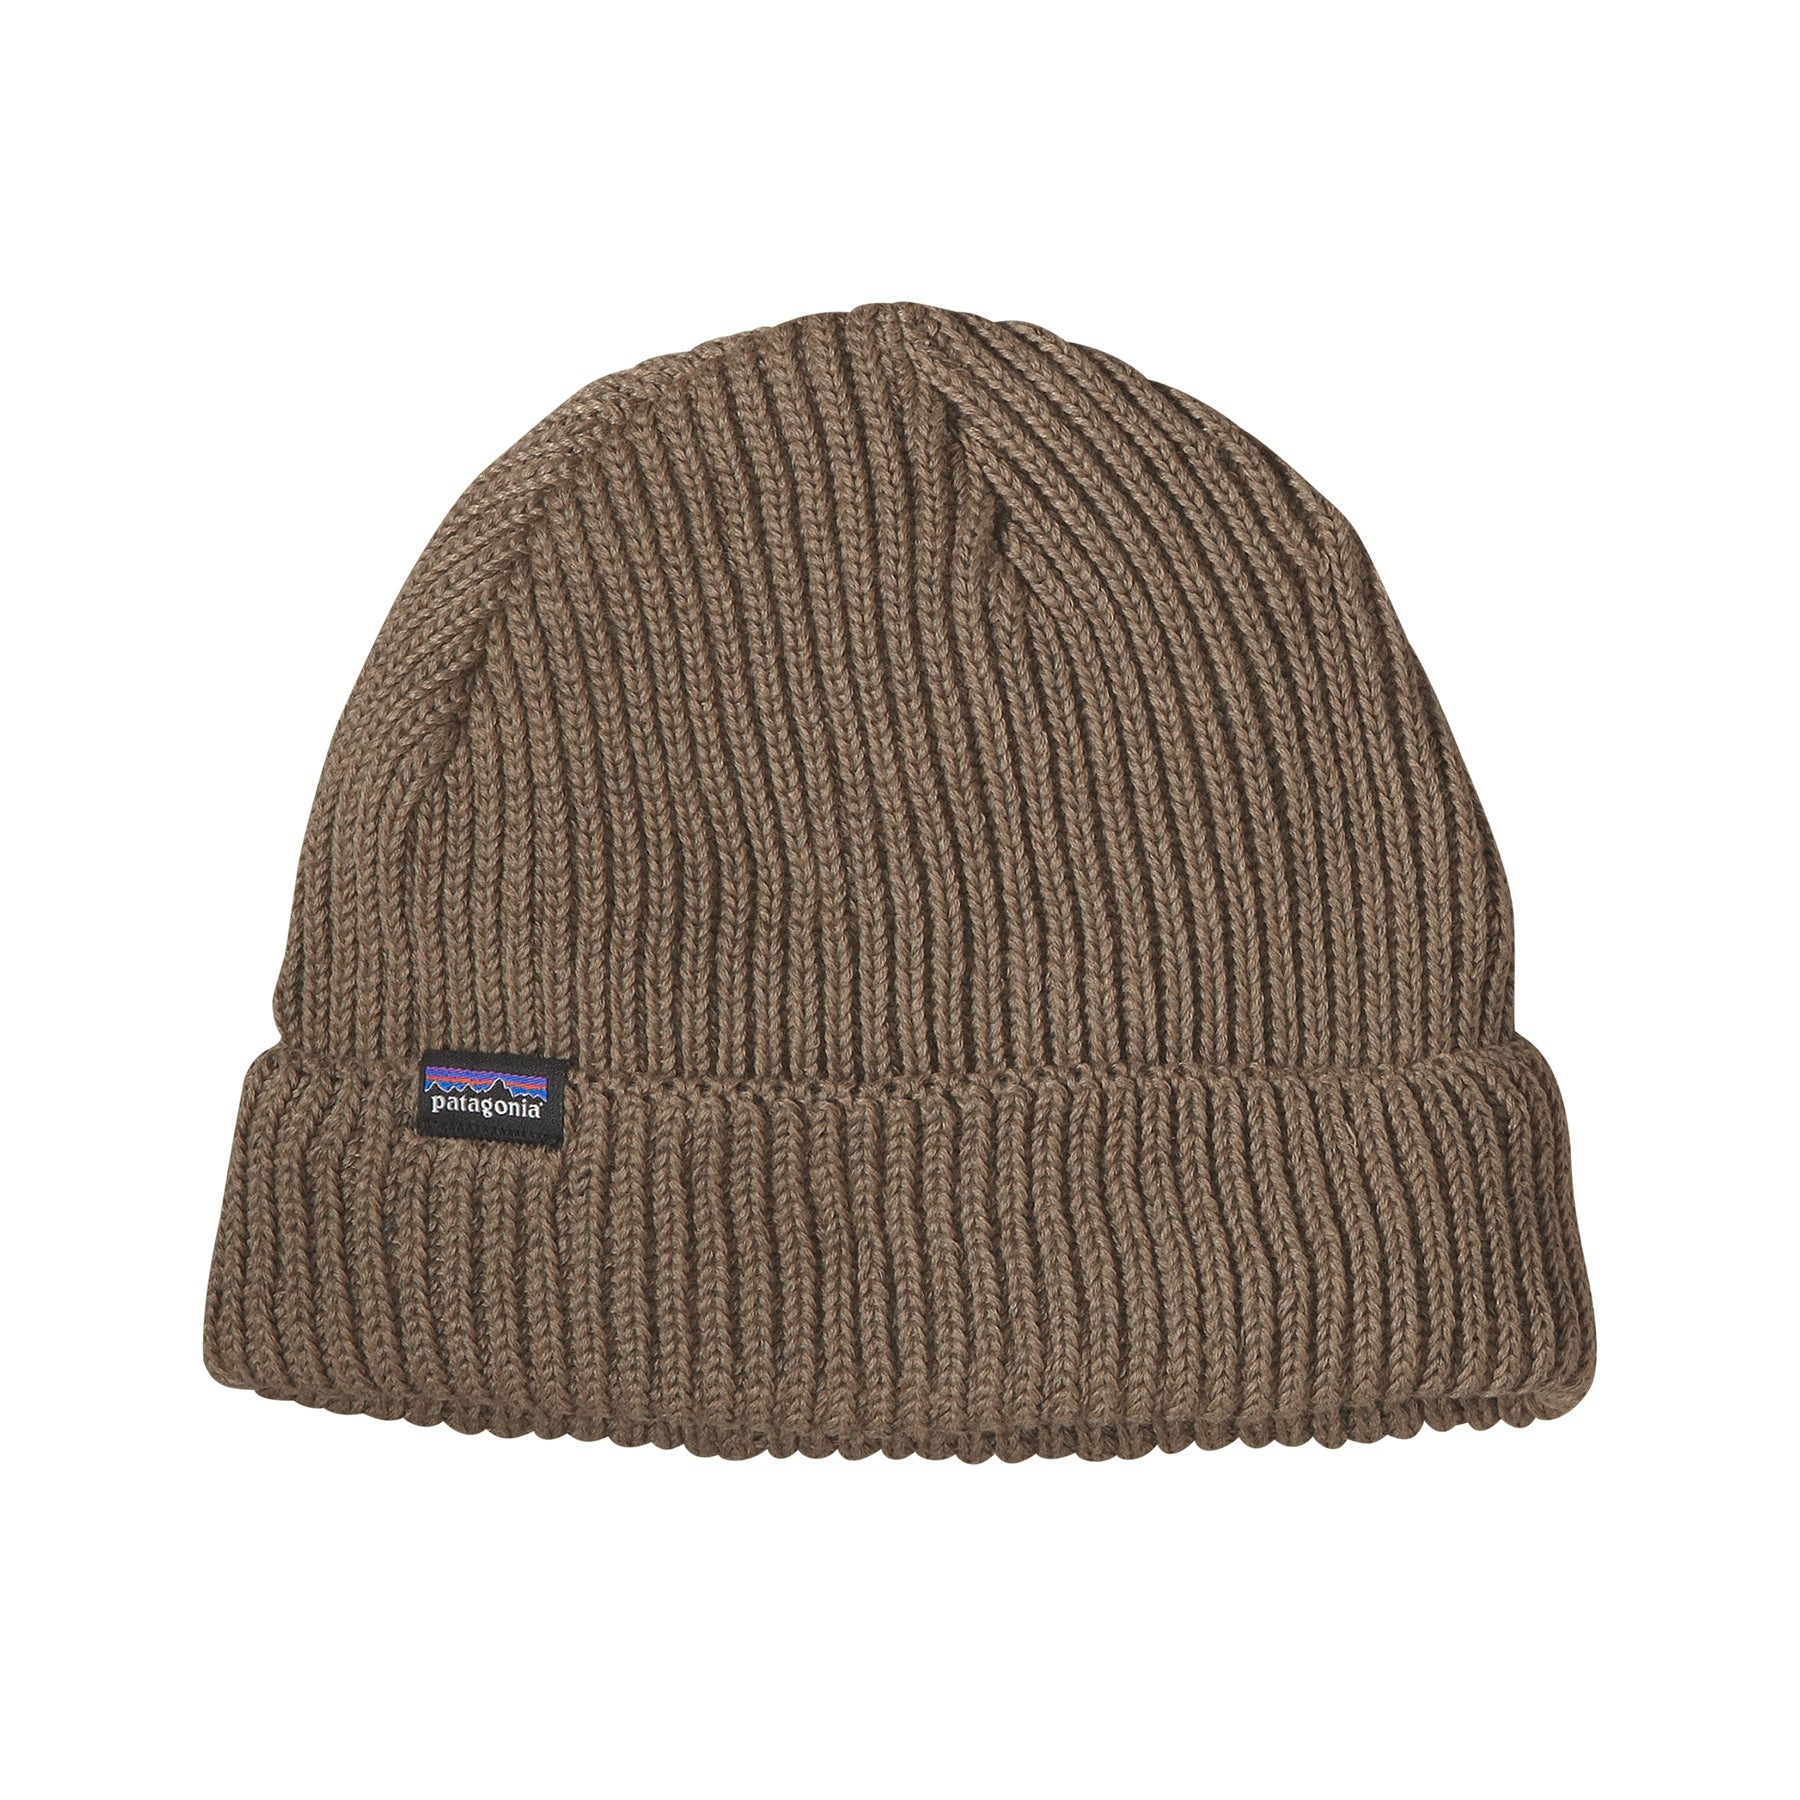 Patagonia Fishermans Rolled Beanie Sand